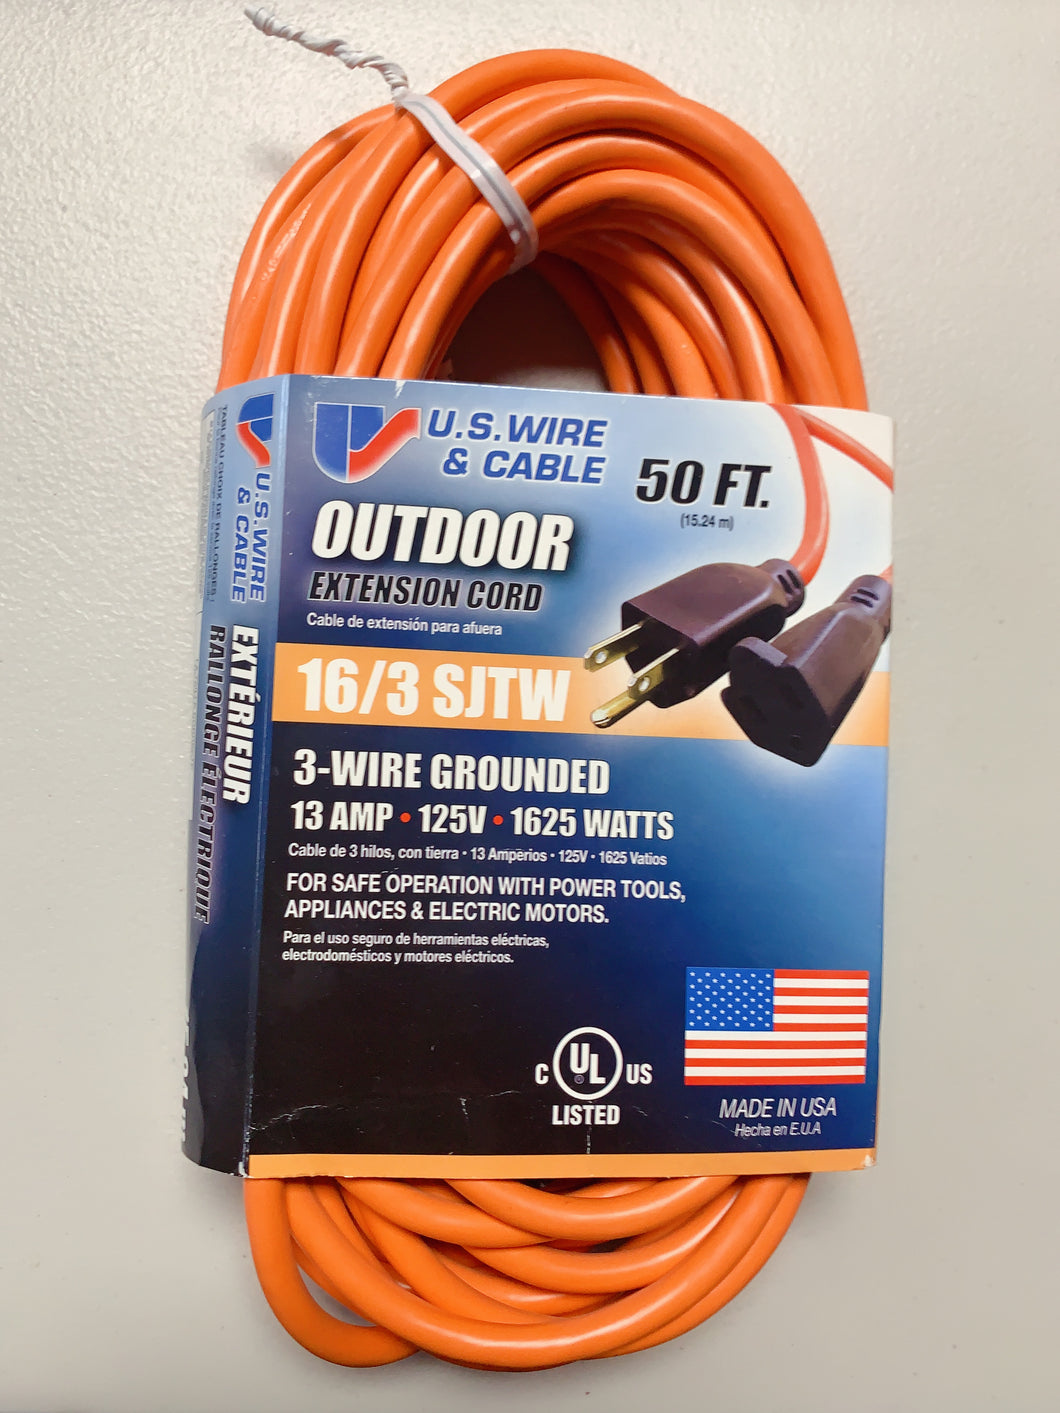 US WIRE & CABLE 50 FT